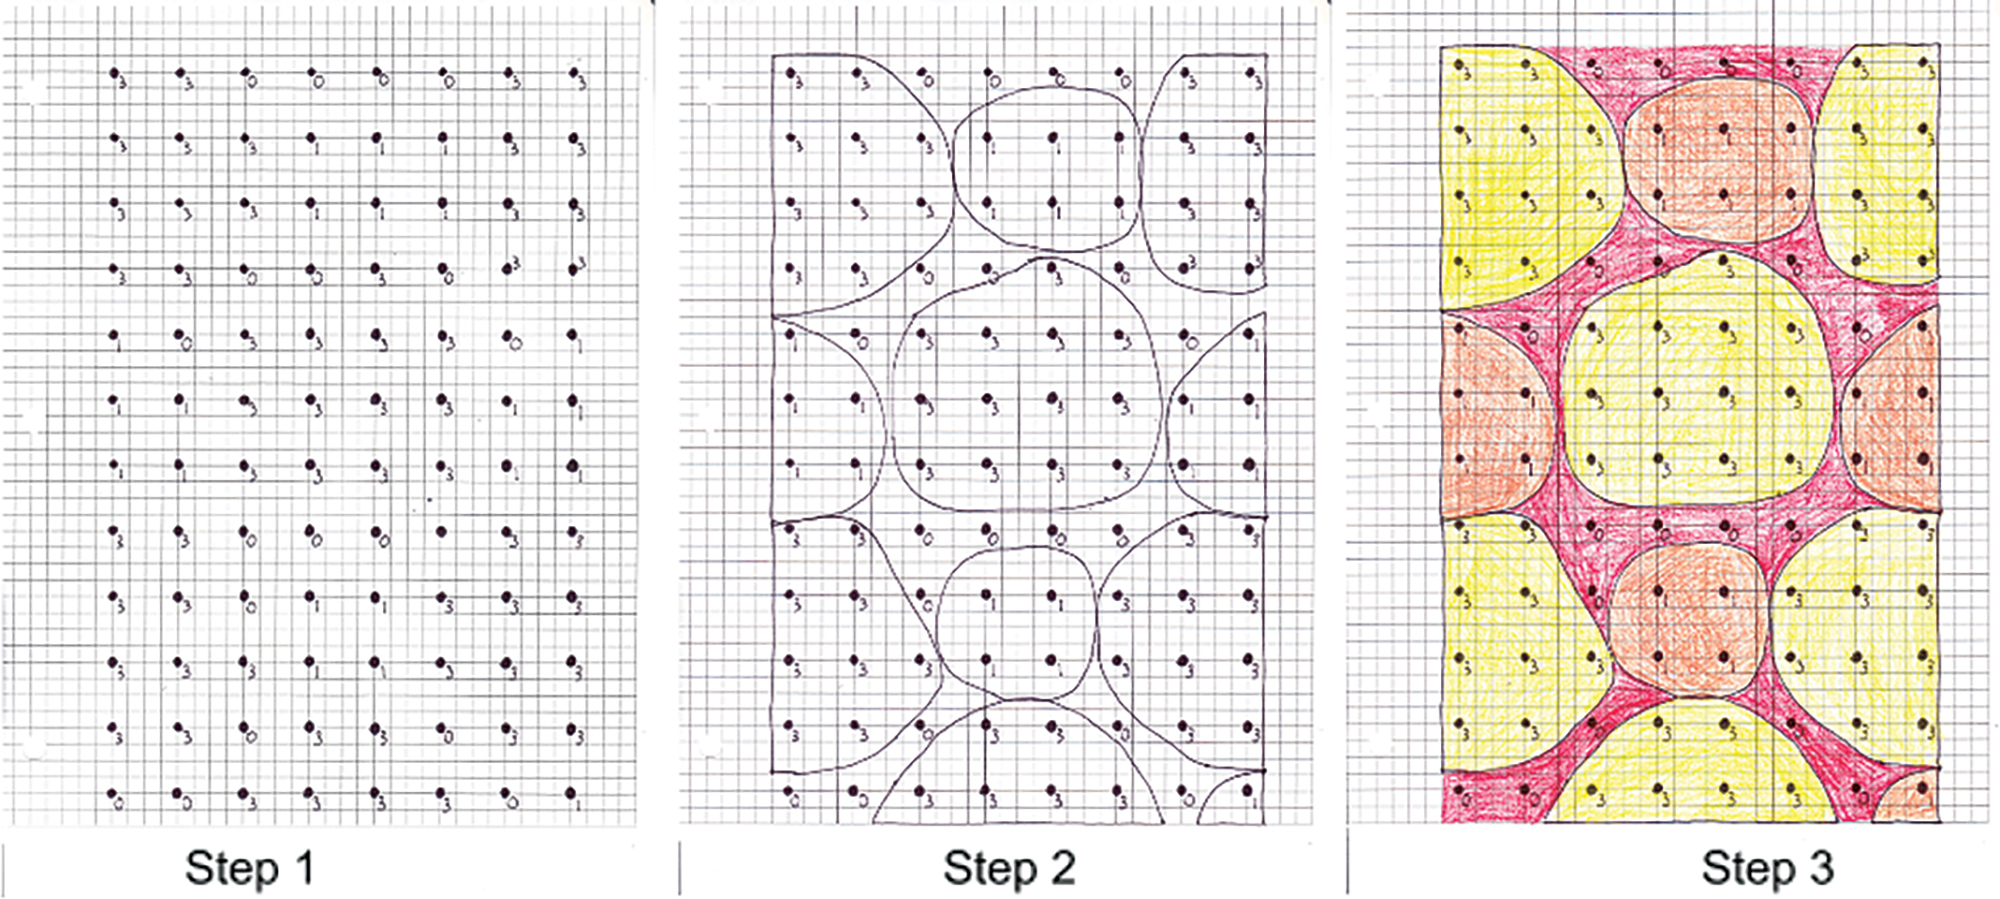 Example pattern progression for a 2D surface representation.